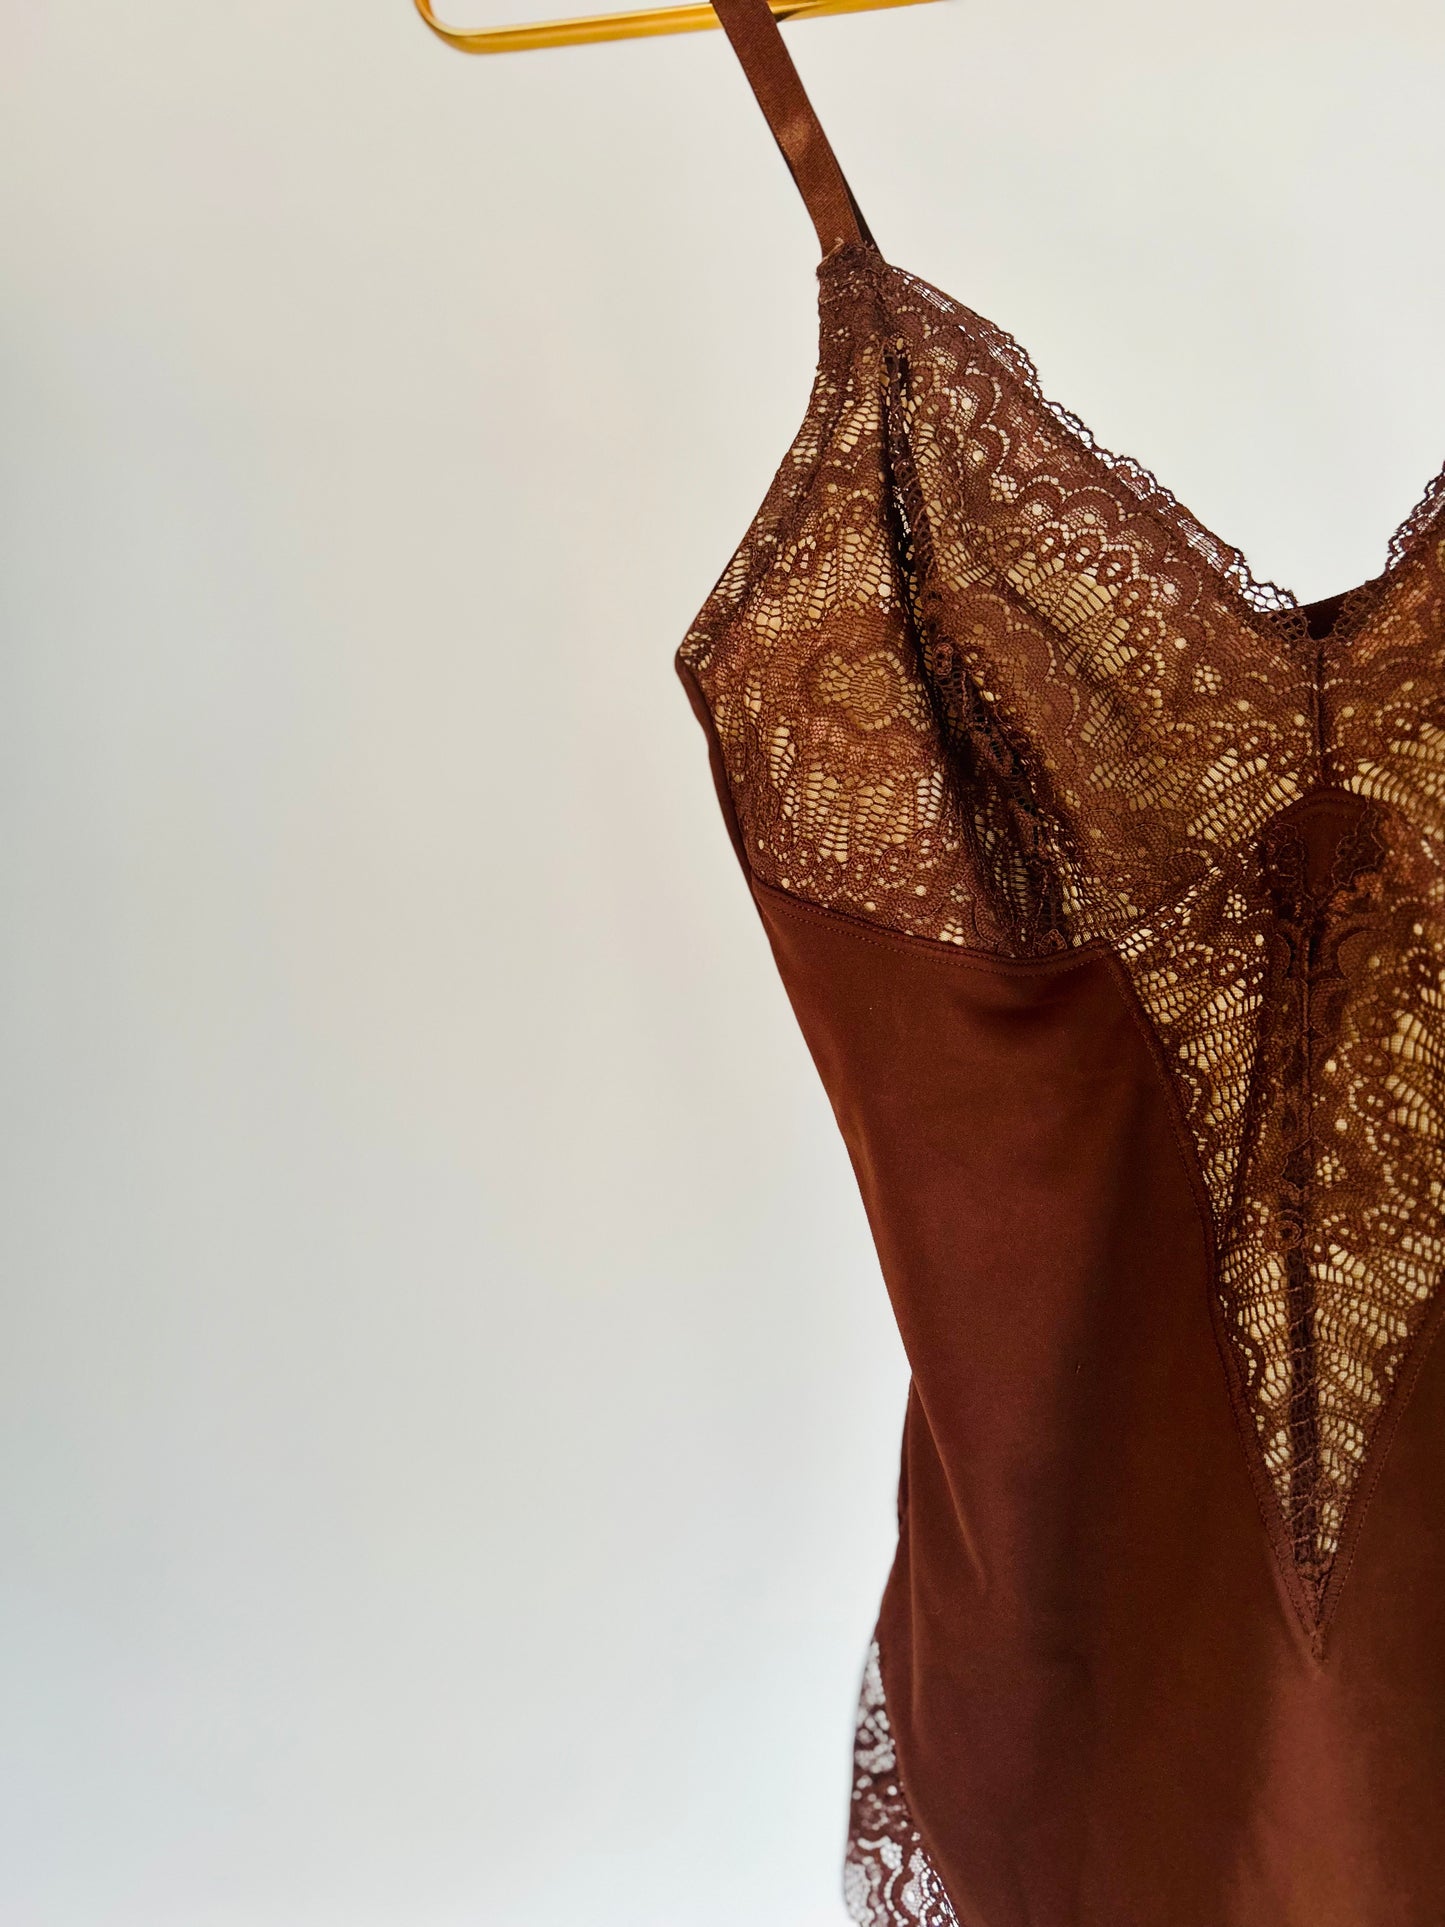 Lace Shaping Bodysuit.  Comfort. Sexy. Support.  Sophisticated. Versatile. Shapewear